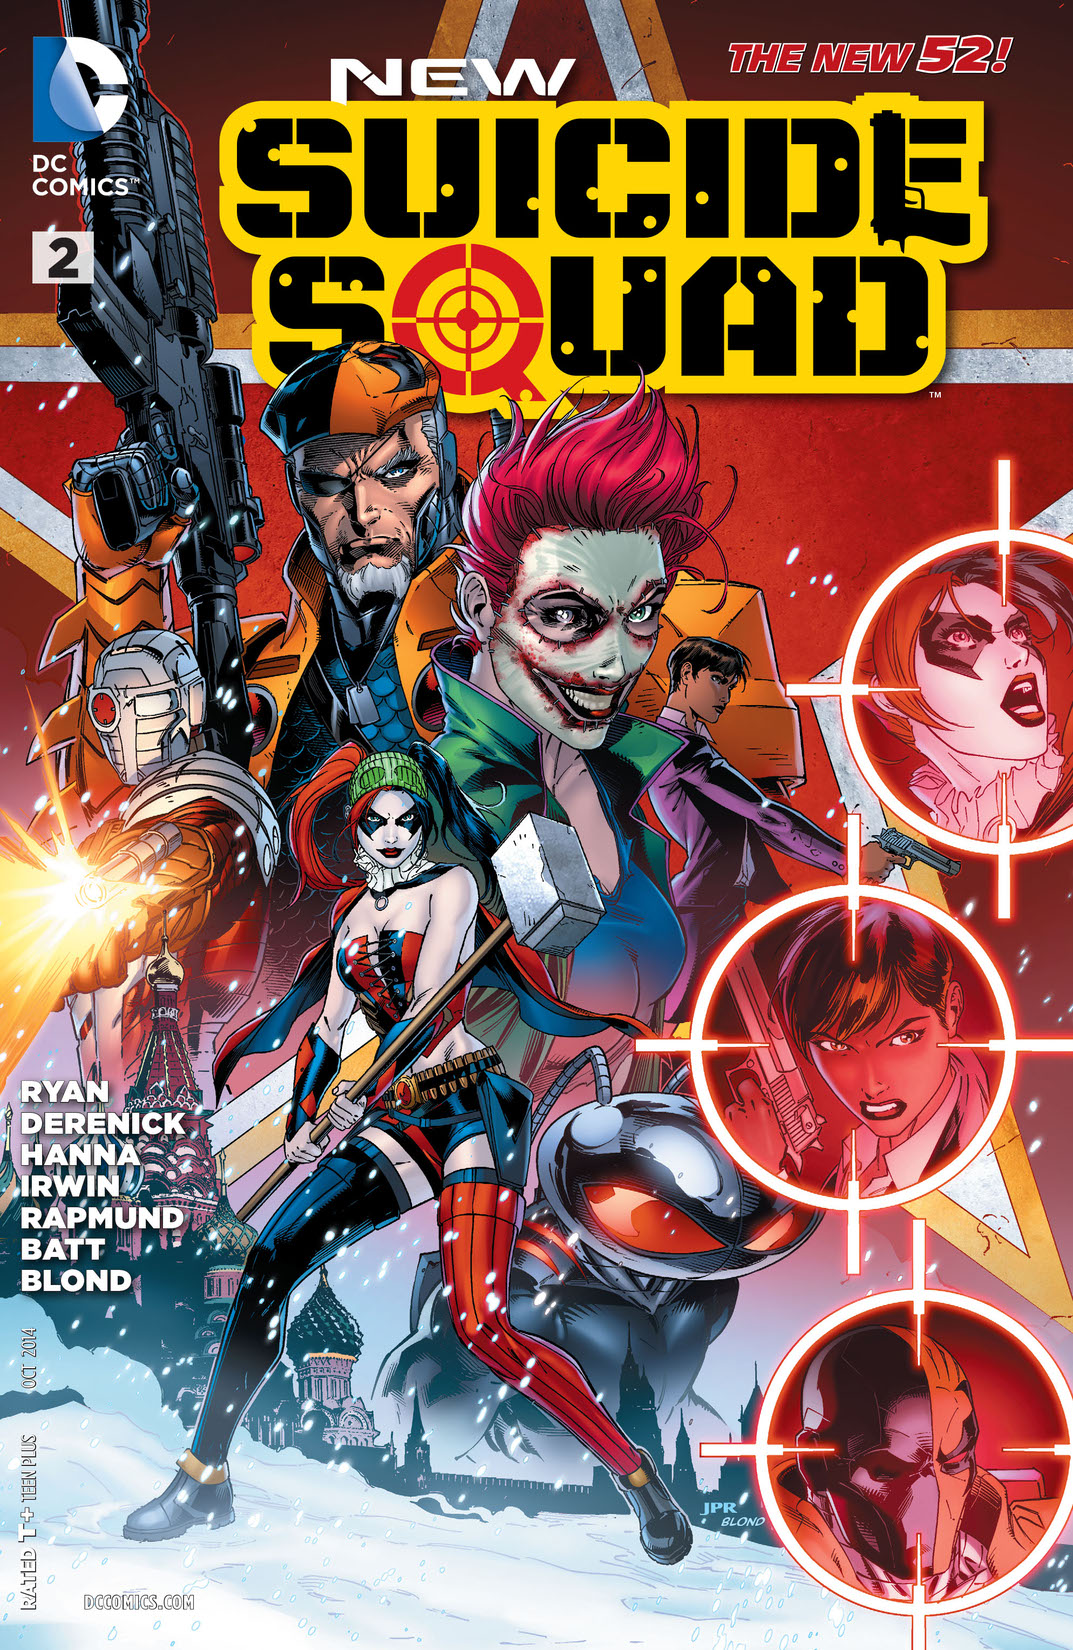 New Suicide Squad #2 preview images